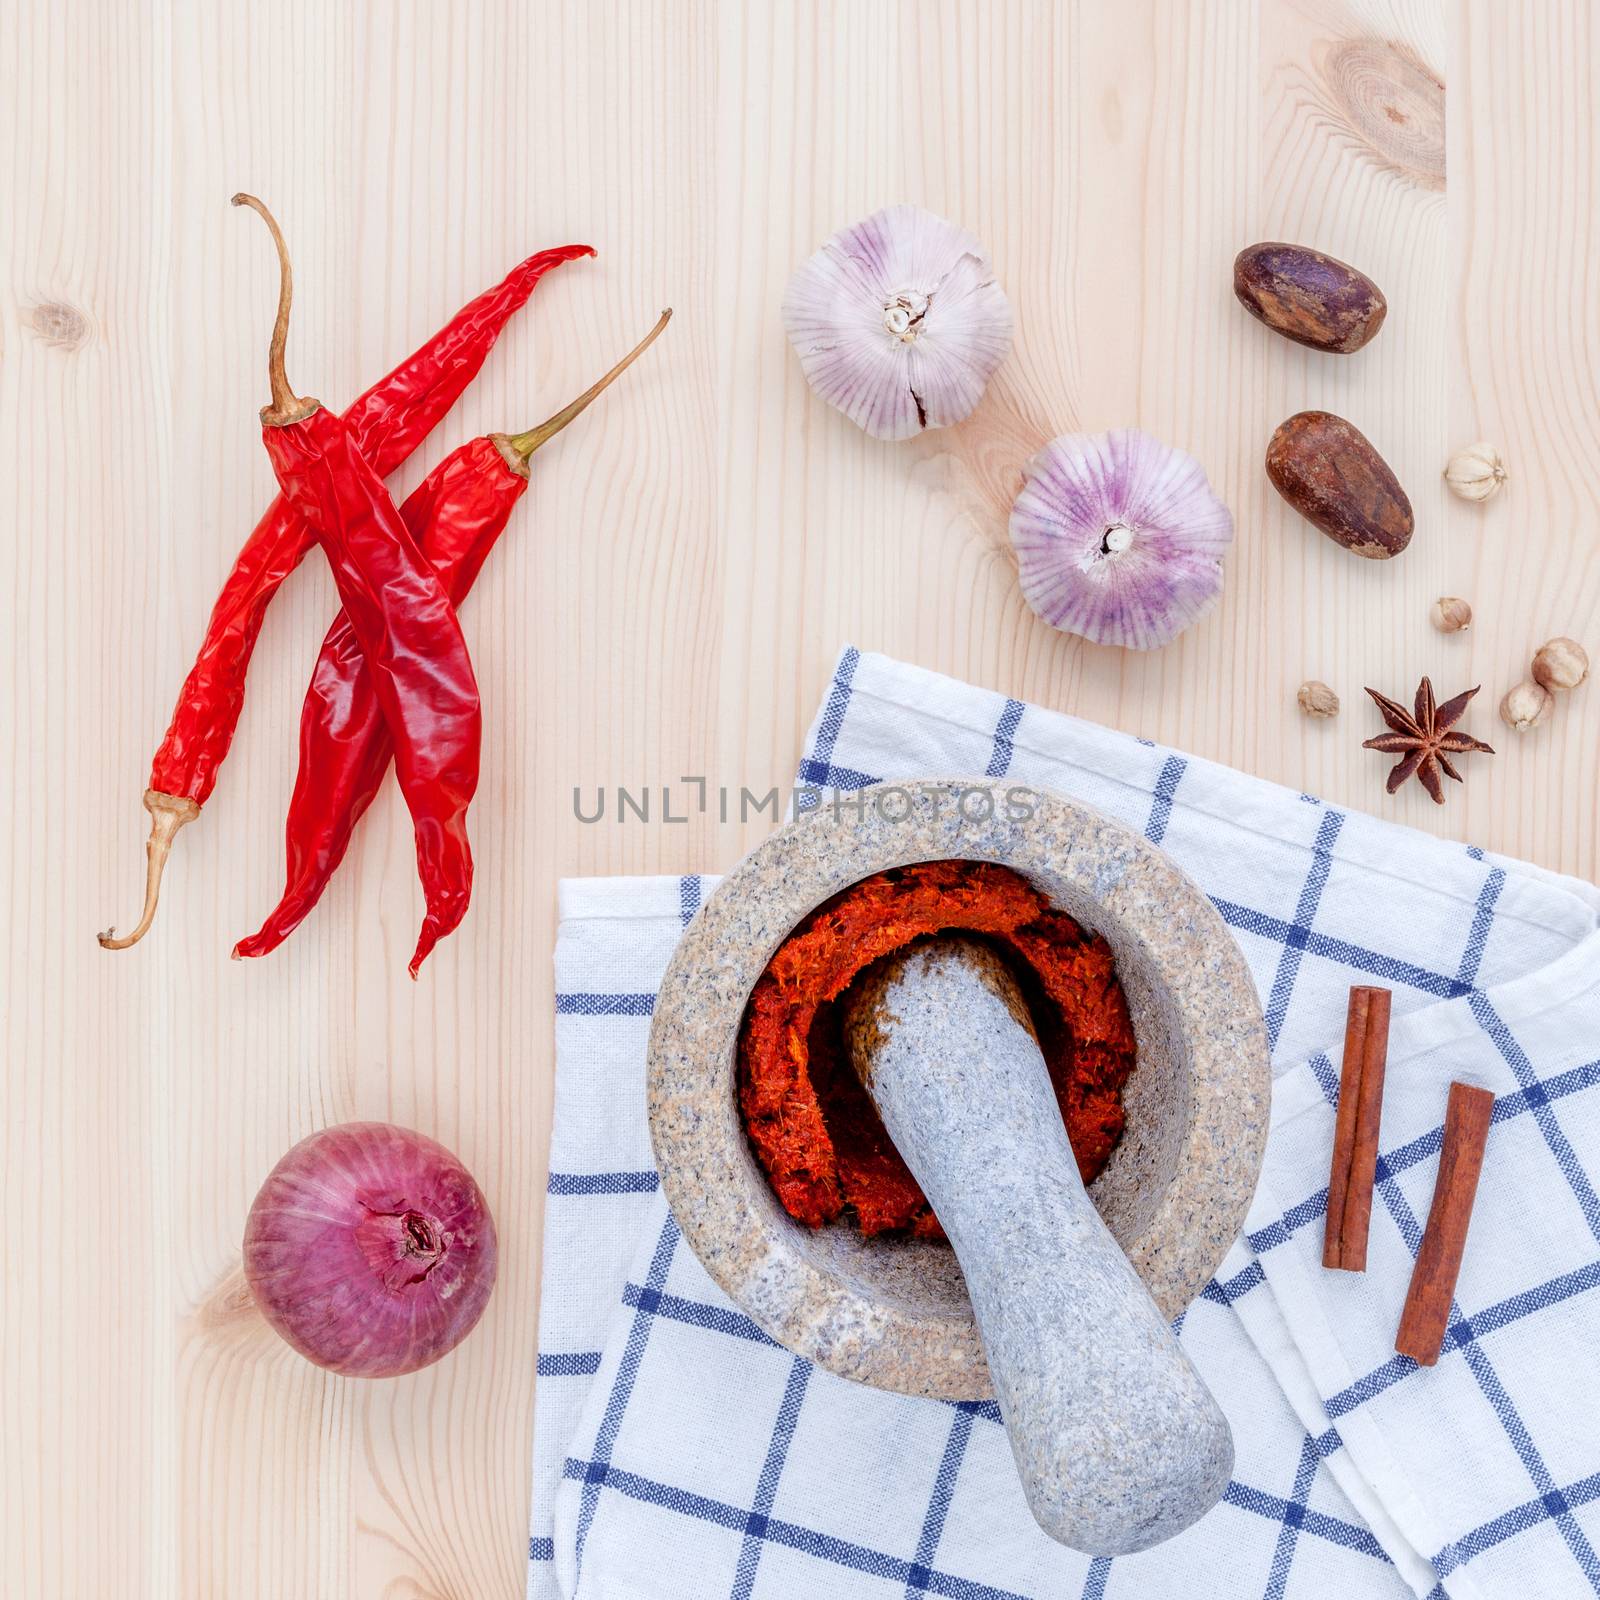 Assortment of spices ingredients and paste of thai popular food  by kerdkanno